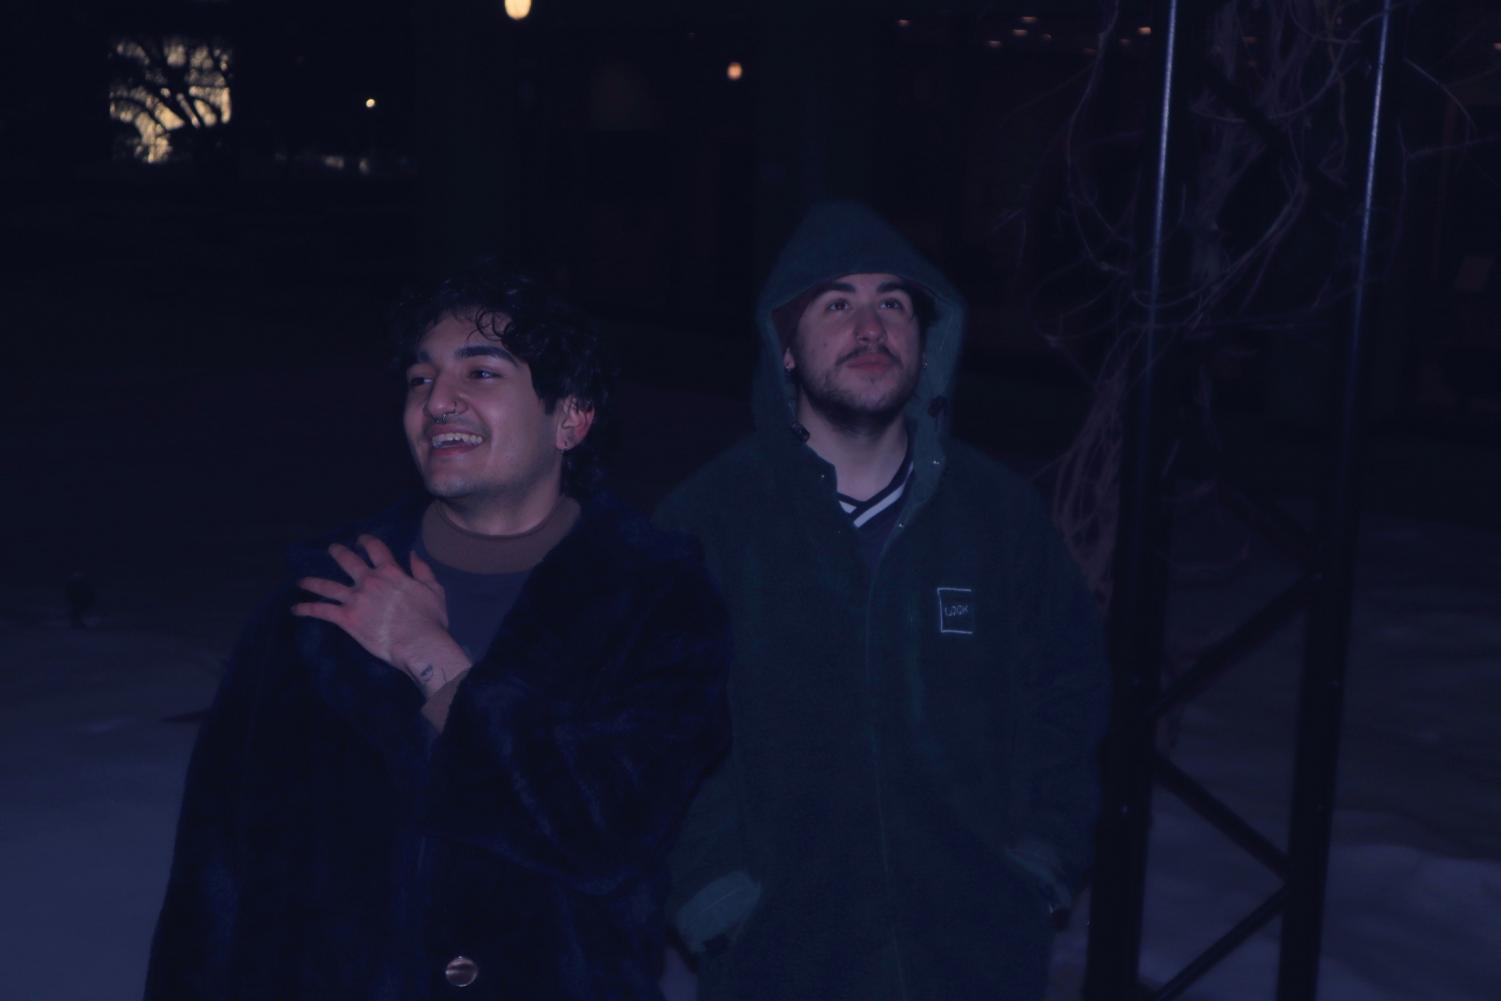 A photo of Kyan Hejazi (Left) and Duncan Taylor (Right) outside at night. There is snow on the ground. Kyan Hejazi looks to the left smiling, his right arm is across his body touching his left shoulder. Duncan Taylor wears a green jacket with the hood on, his hands are in his pockets. He looks up to the sky smiling. Next to him is a black bar.